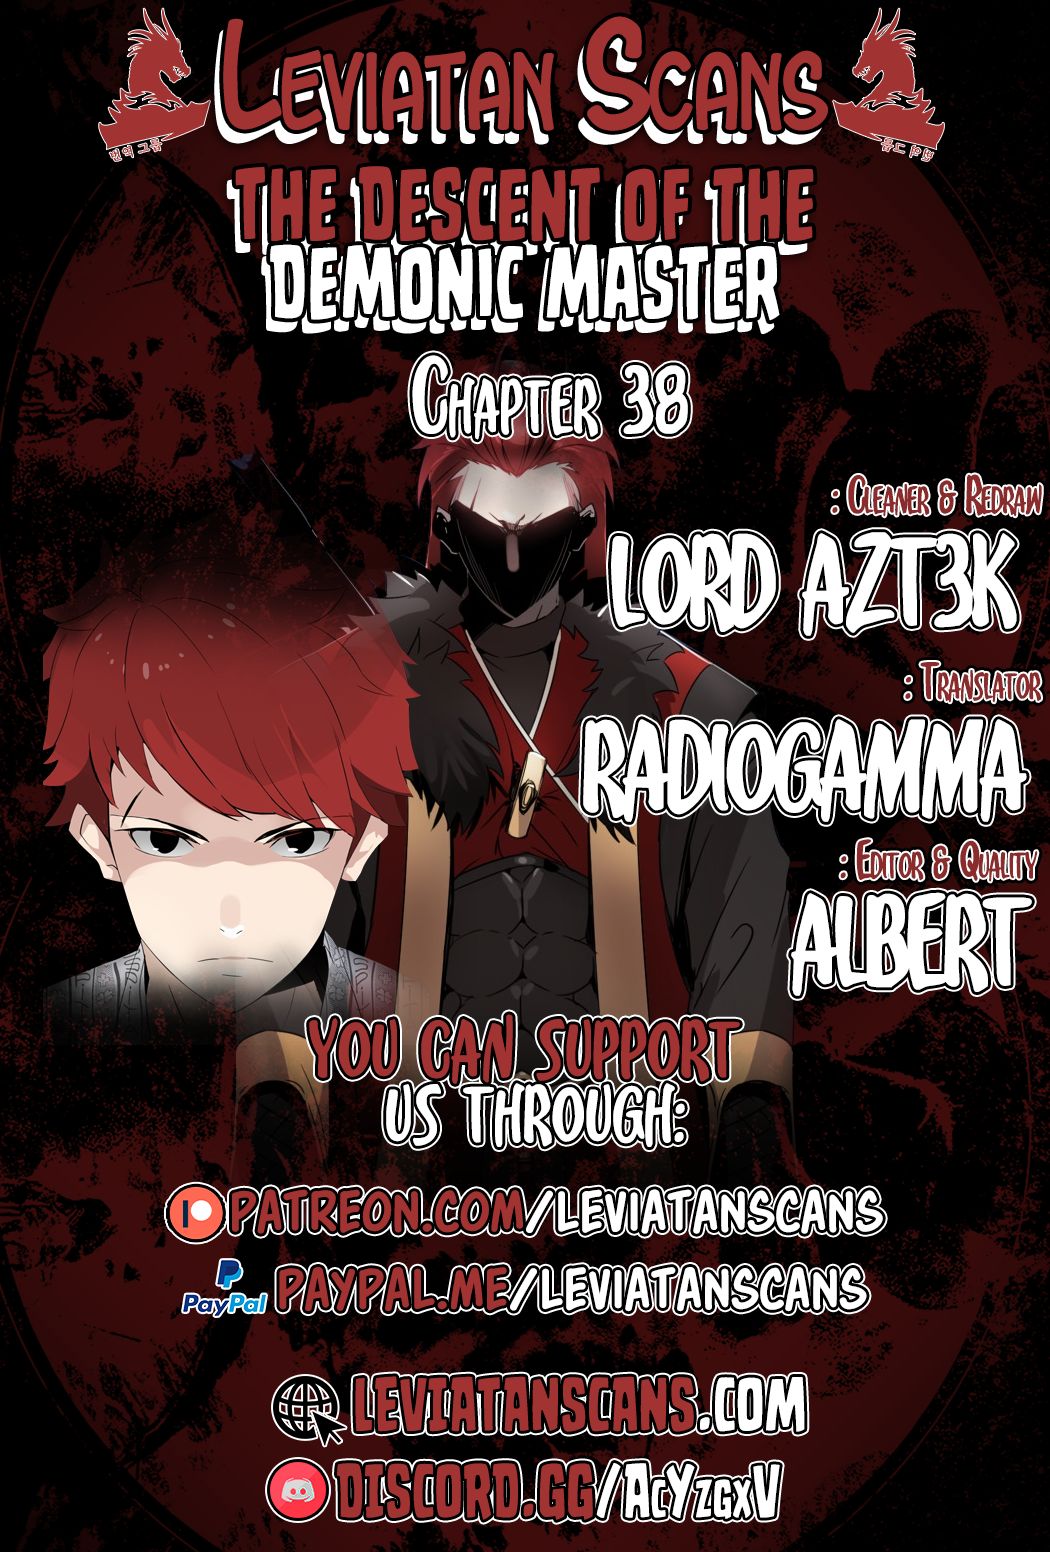 The Descent Of The Demonic Master Chapter 38